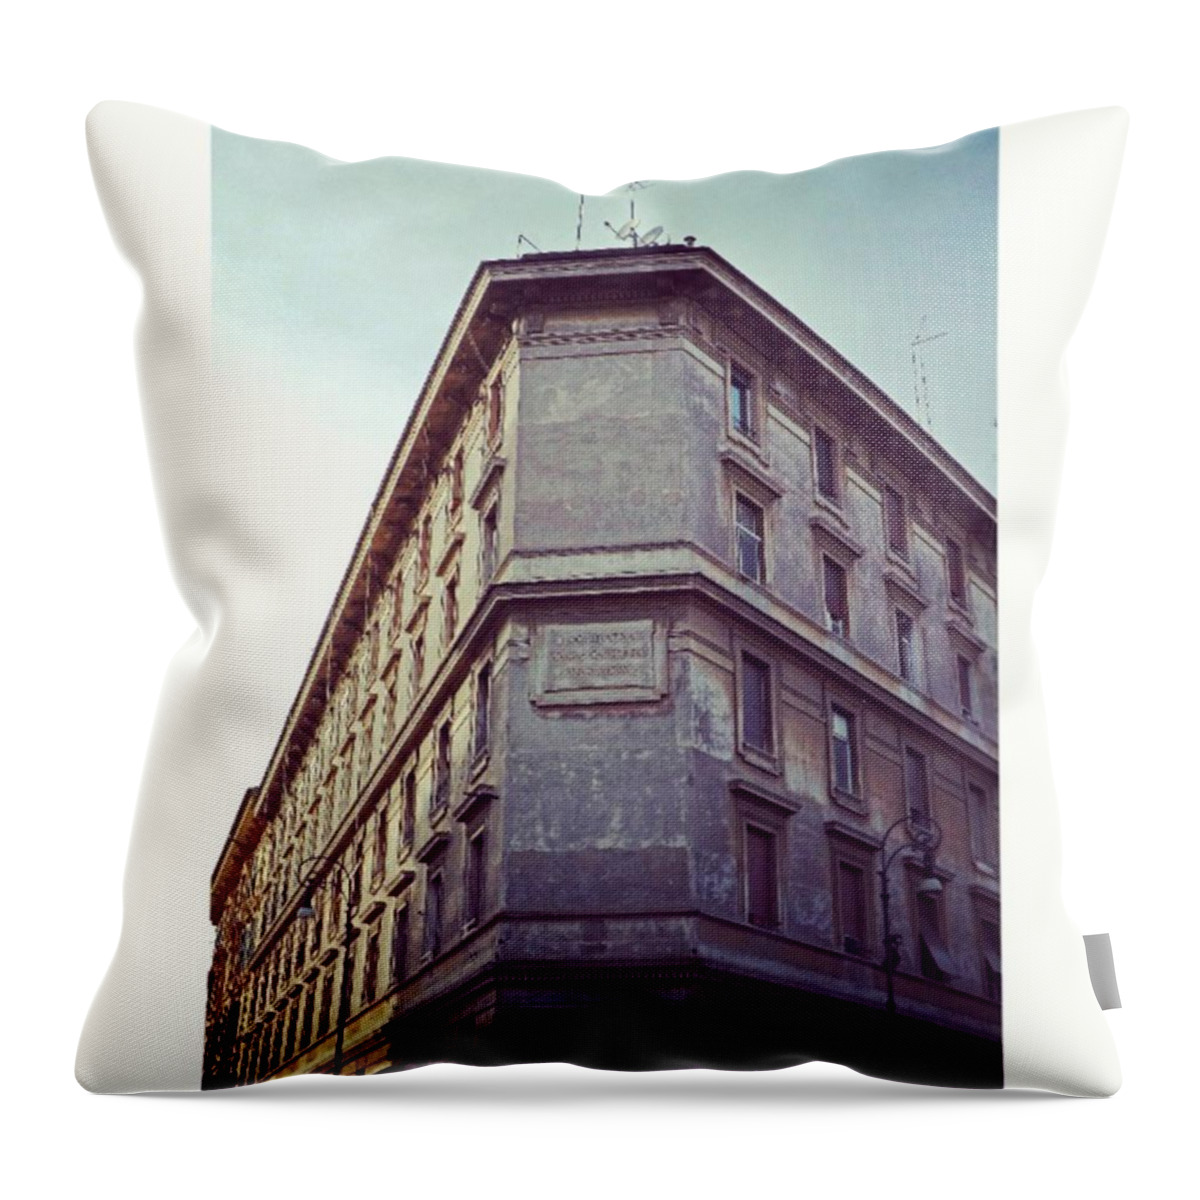 Triangolo Throw Pillow featuring the photograph #palazzo #palazzi #igersitalia by Lorin Braticevici